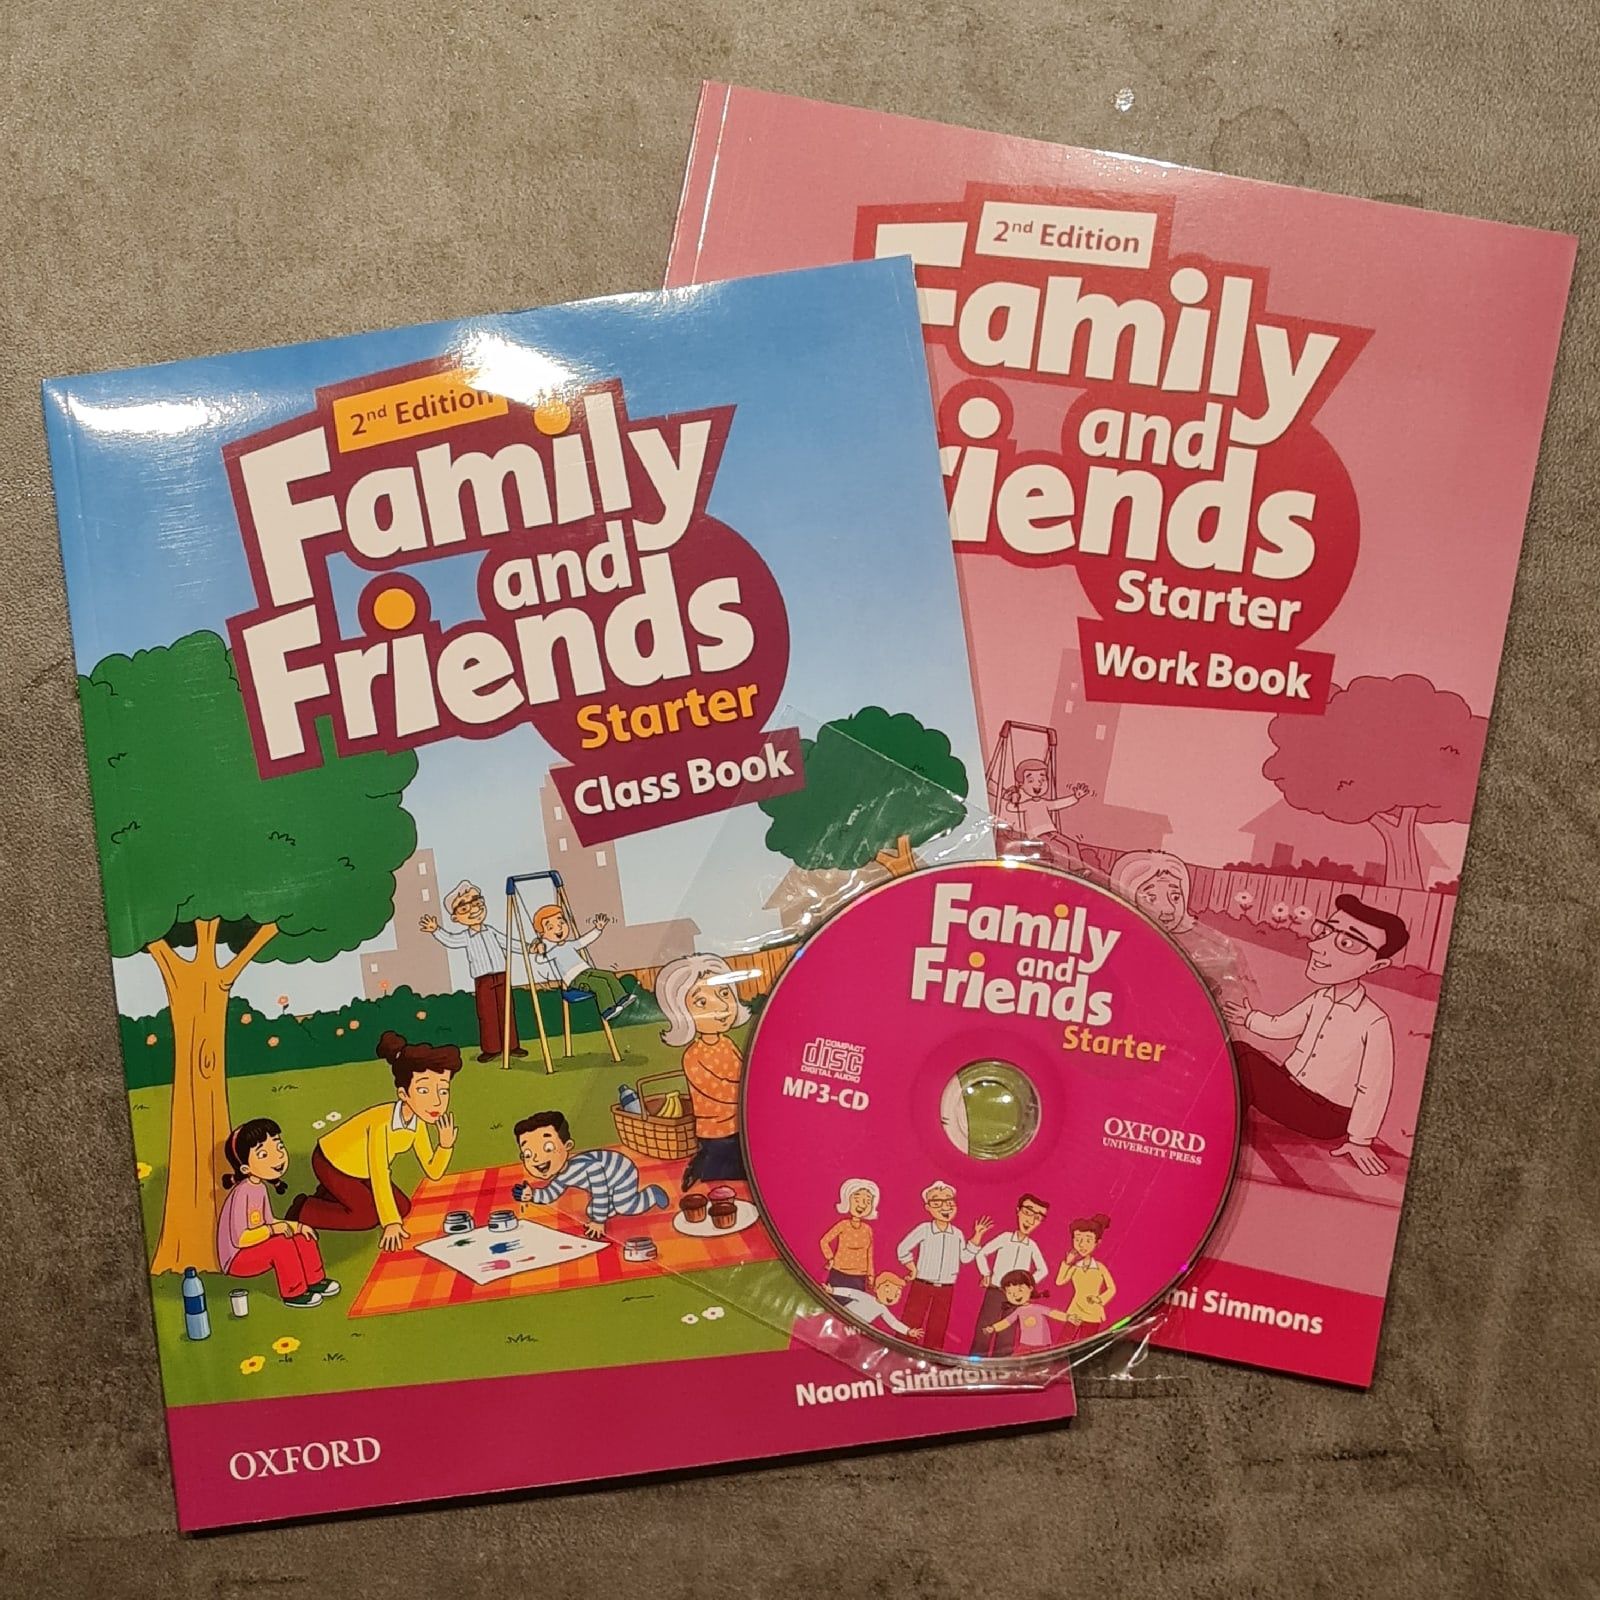 Friends starter book. Family and friends Starter Workbook. Family and friends Starter материалы. Family and friends 2. Family and friends Starter picture Dictionary.